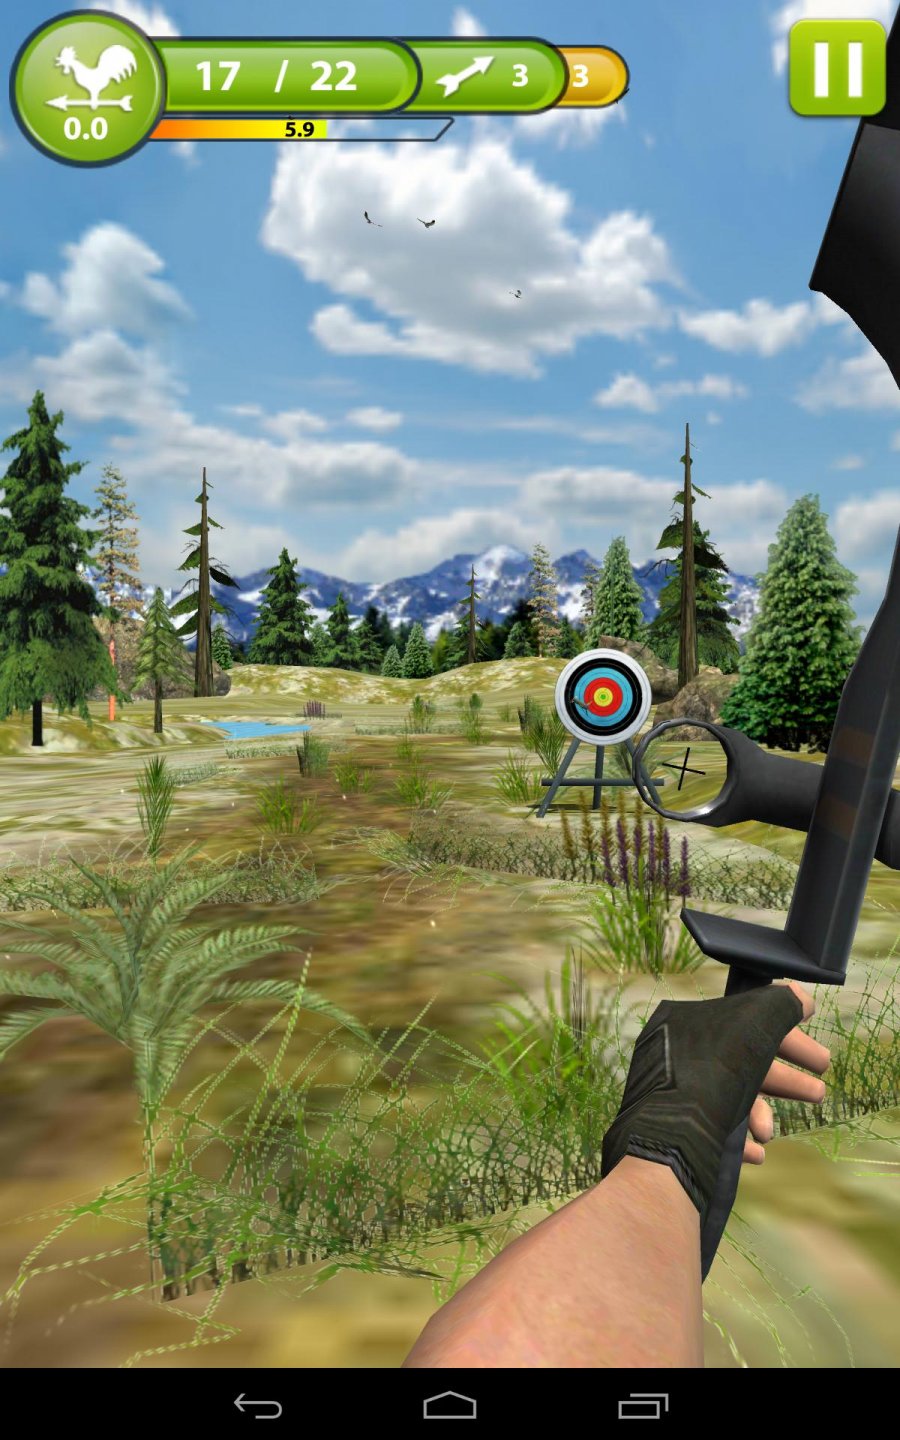 Archery Master 3D Android Game APK (com.junerking.archery) by TerranDroid